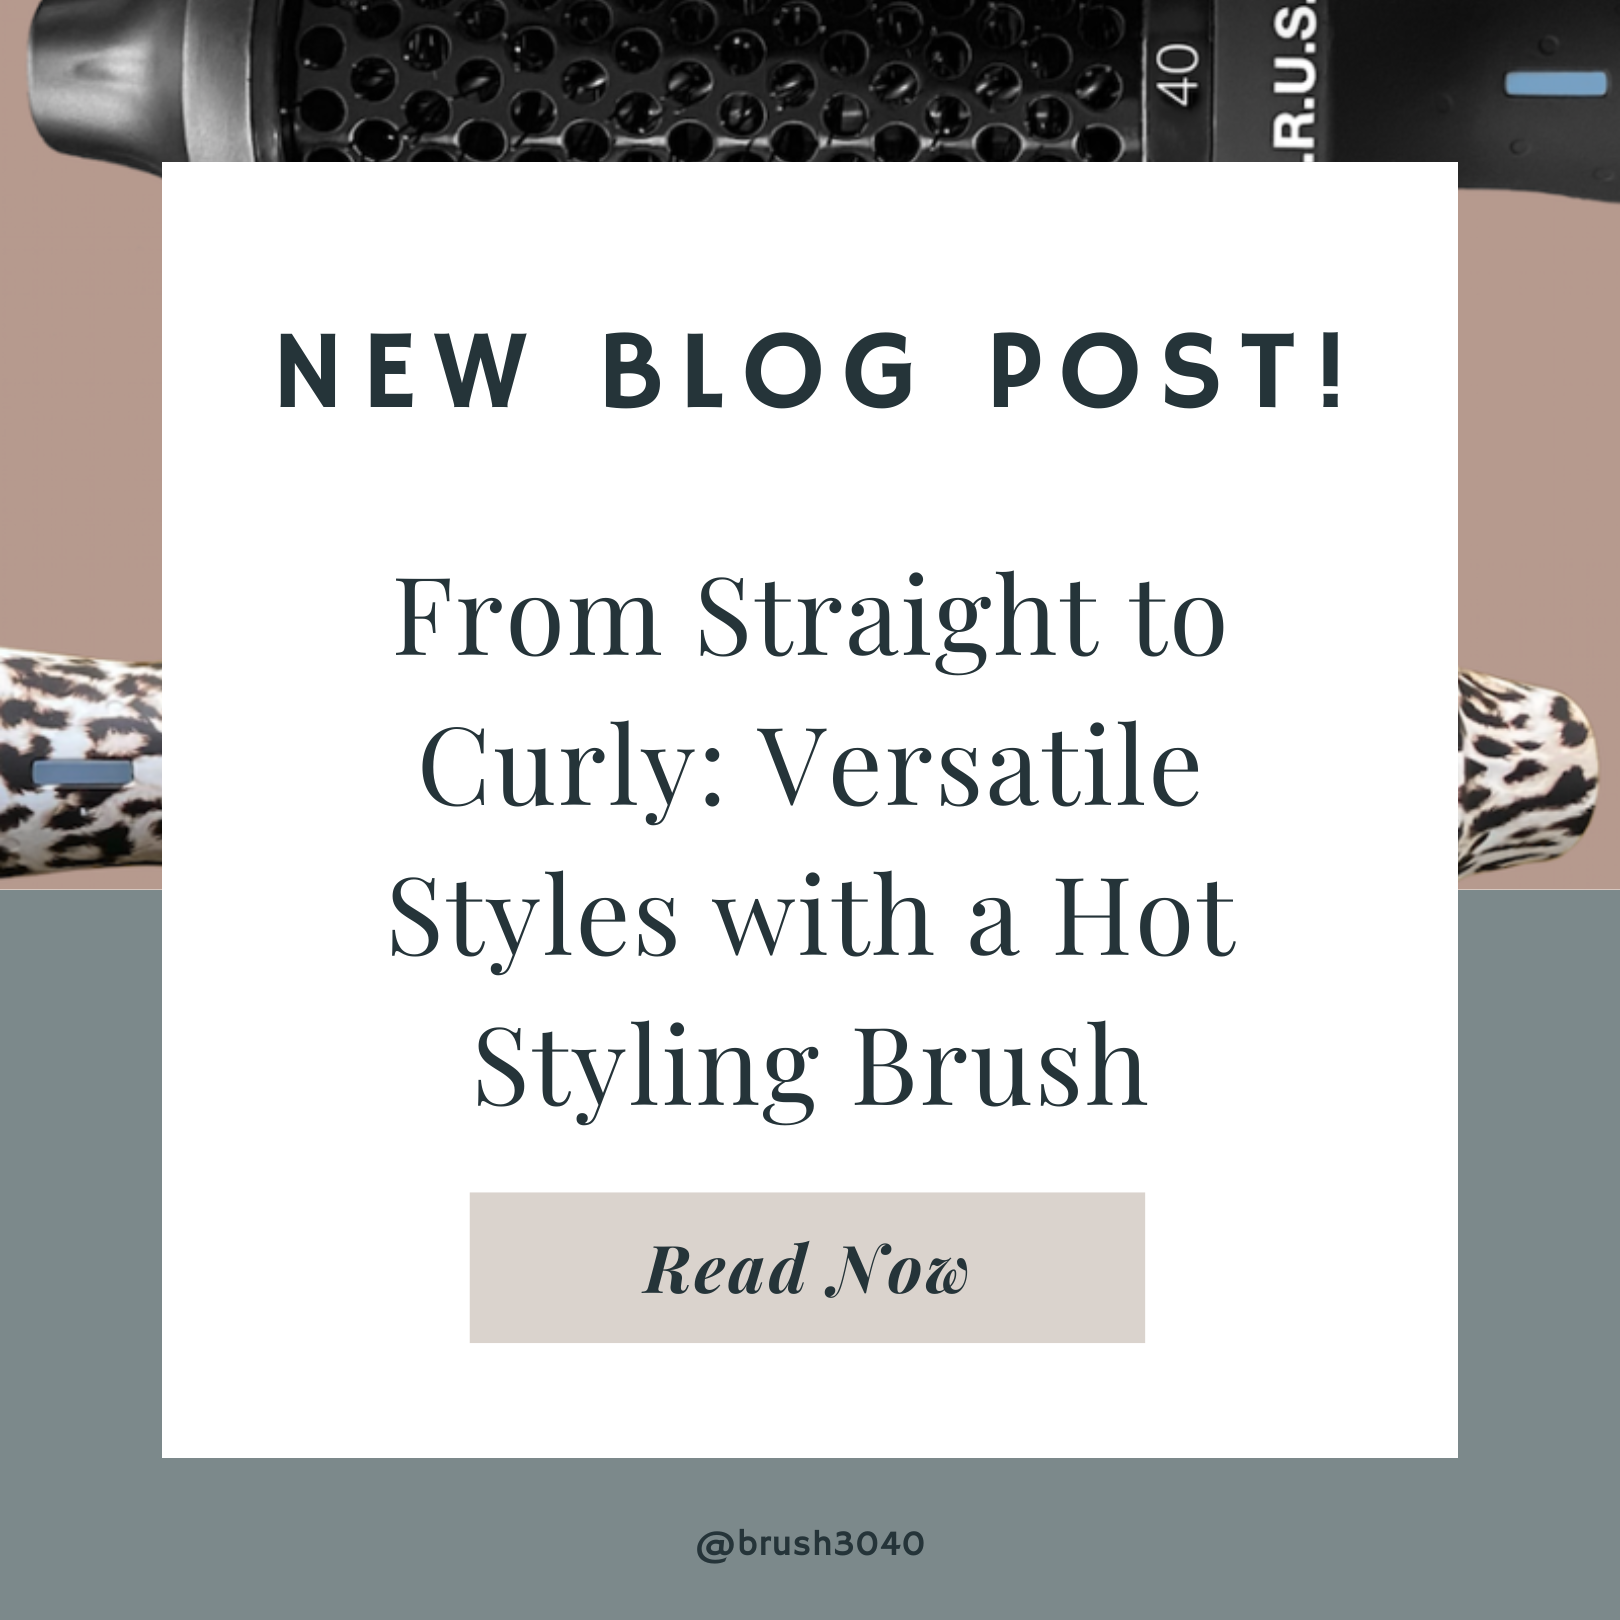 From Straight to Curly: Versatile Styles with a Hot Styling Brush